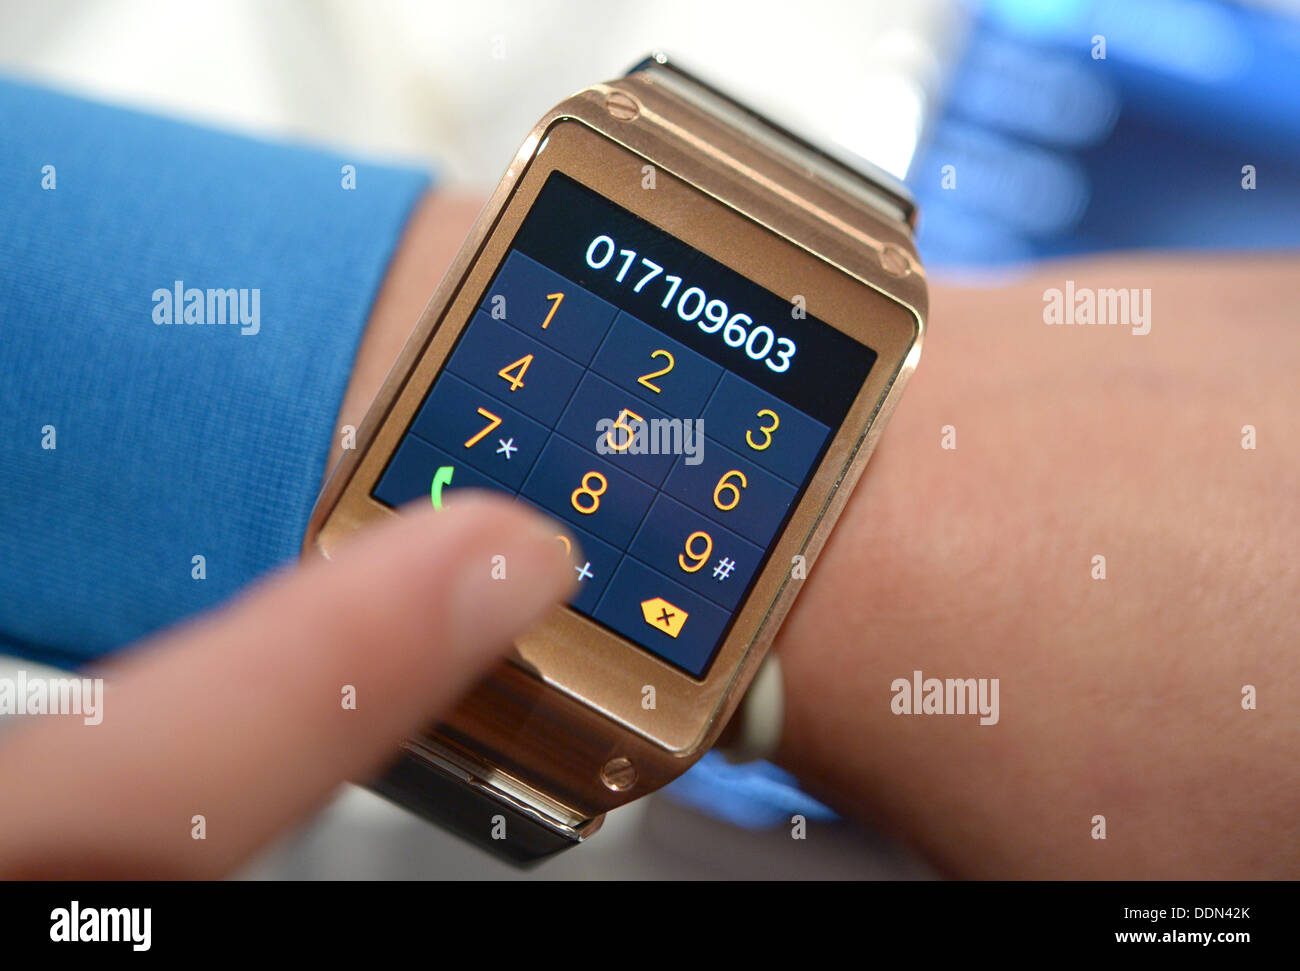 Samsung galaxy gear watch hi-res stock photography and images - Page 2 -  Alamy